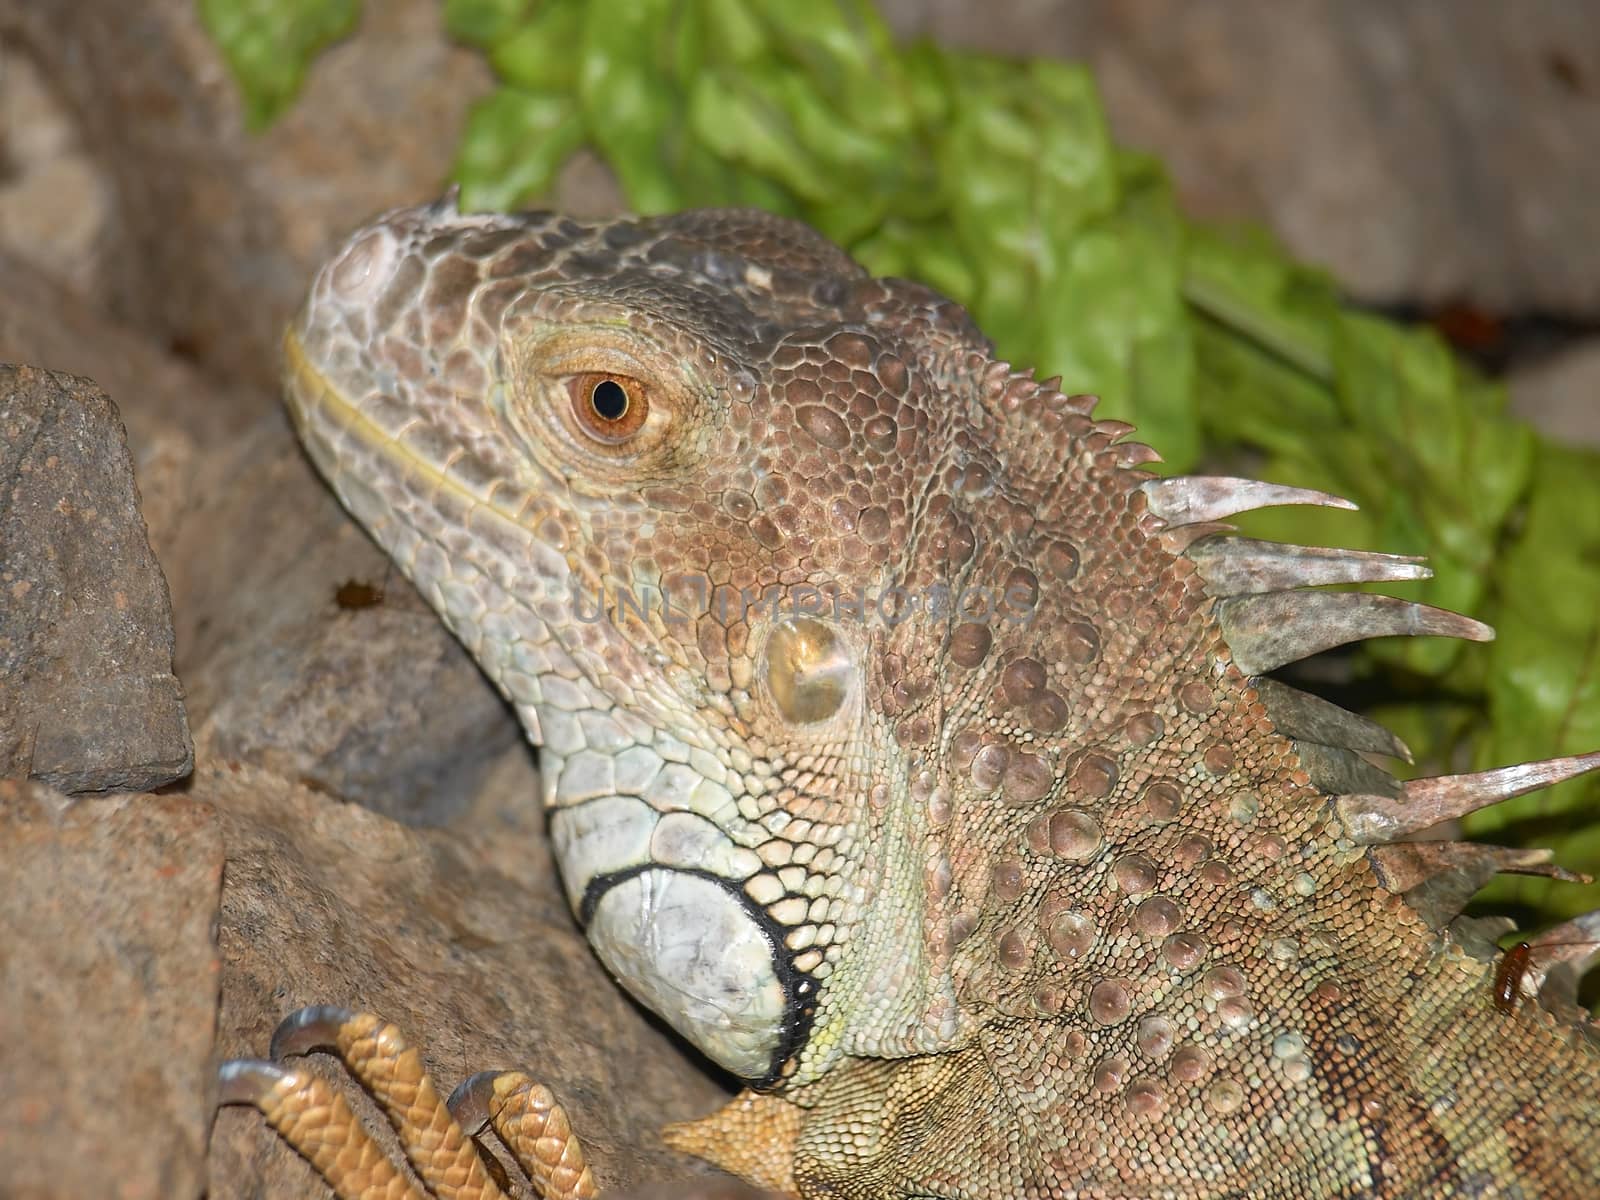 Head and face of an adult dragon